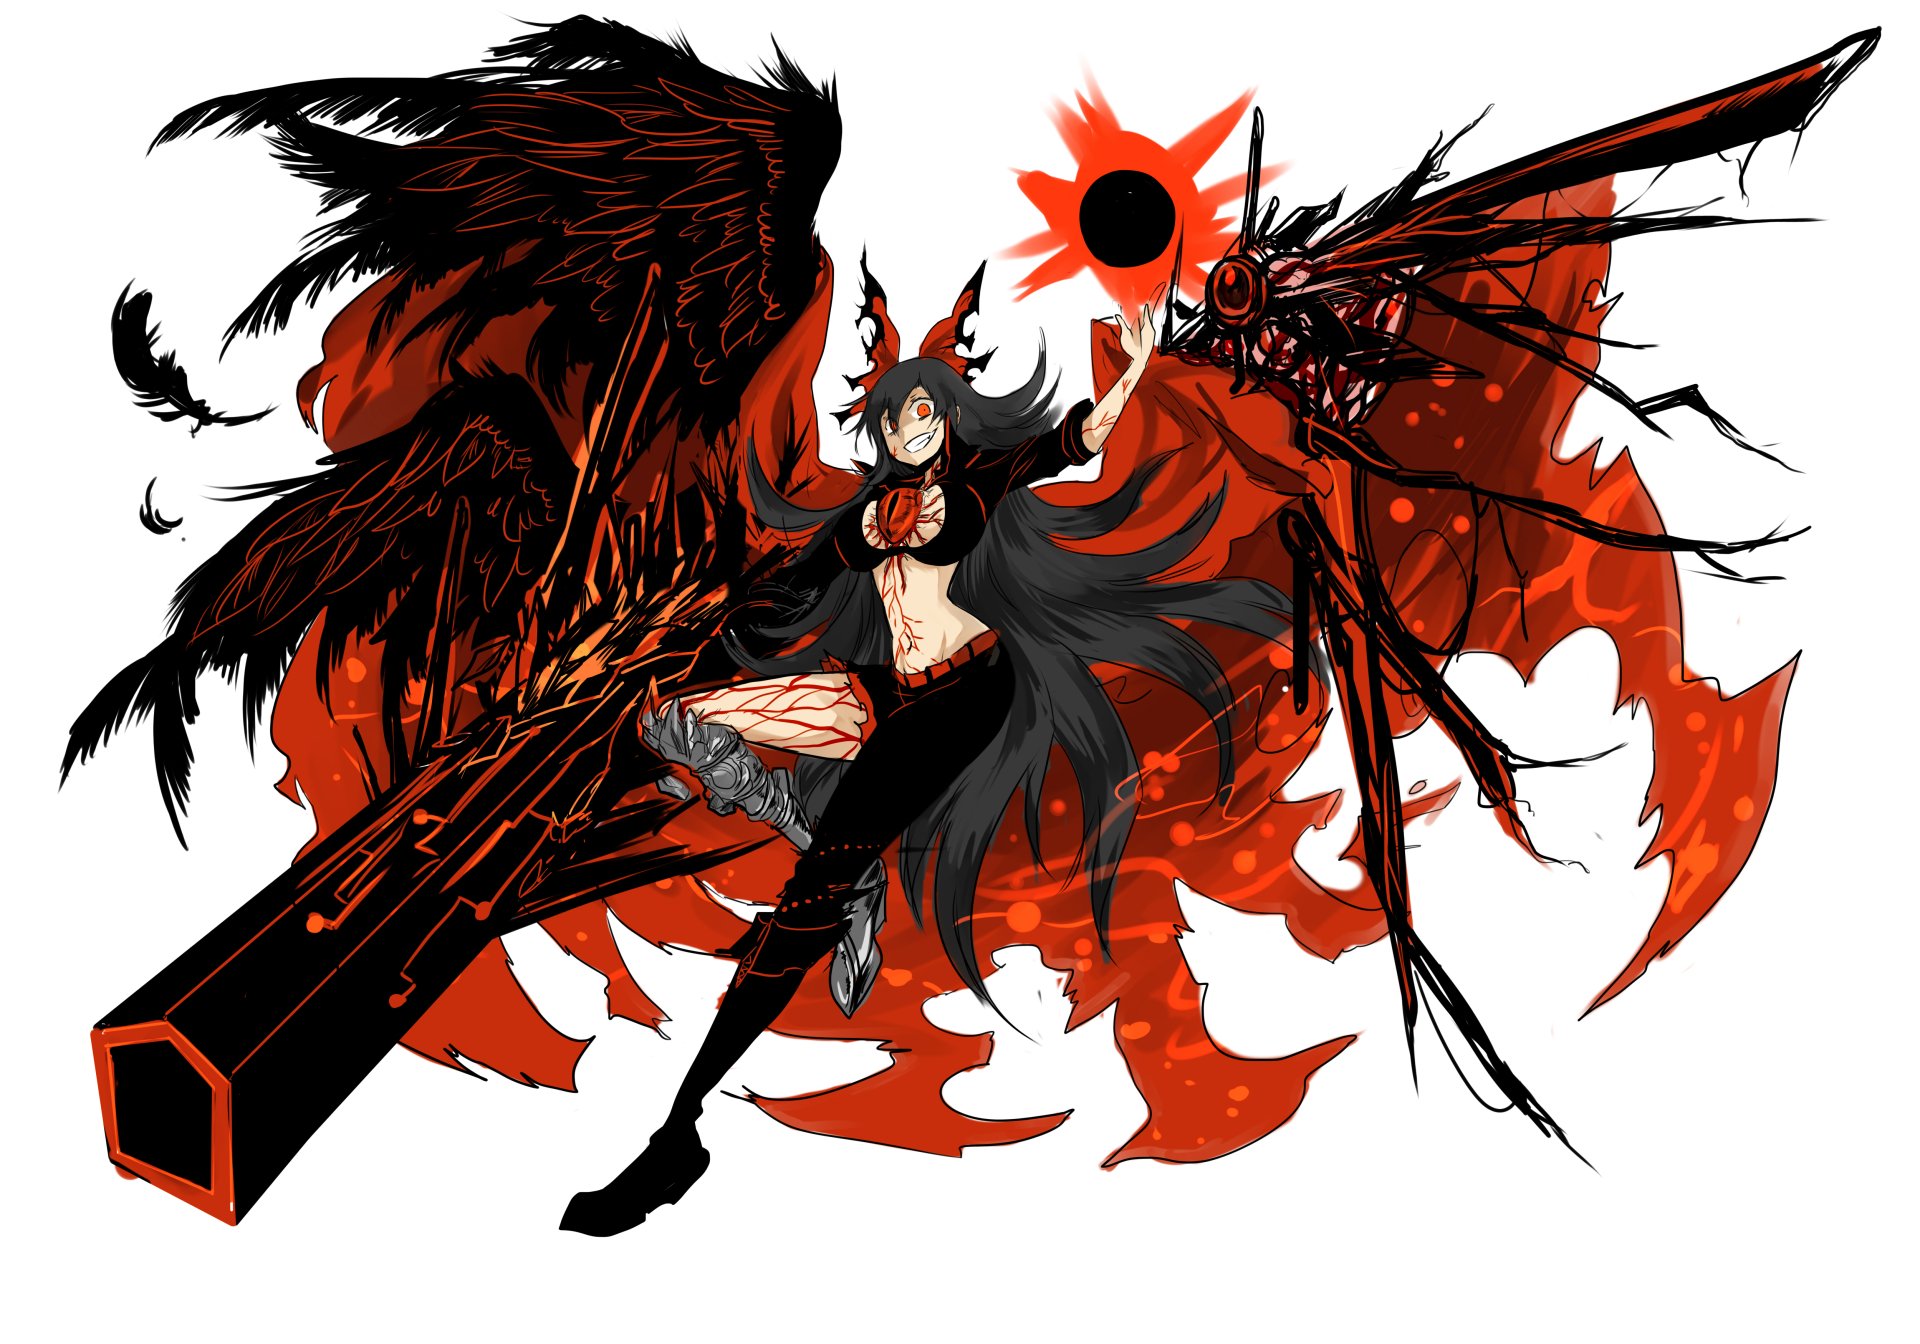 demon anime girl with black hair and red eyes and wings